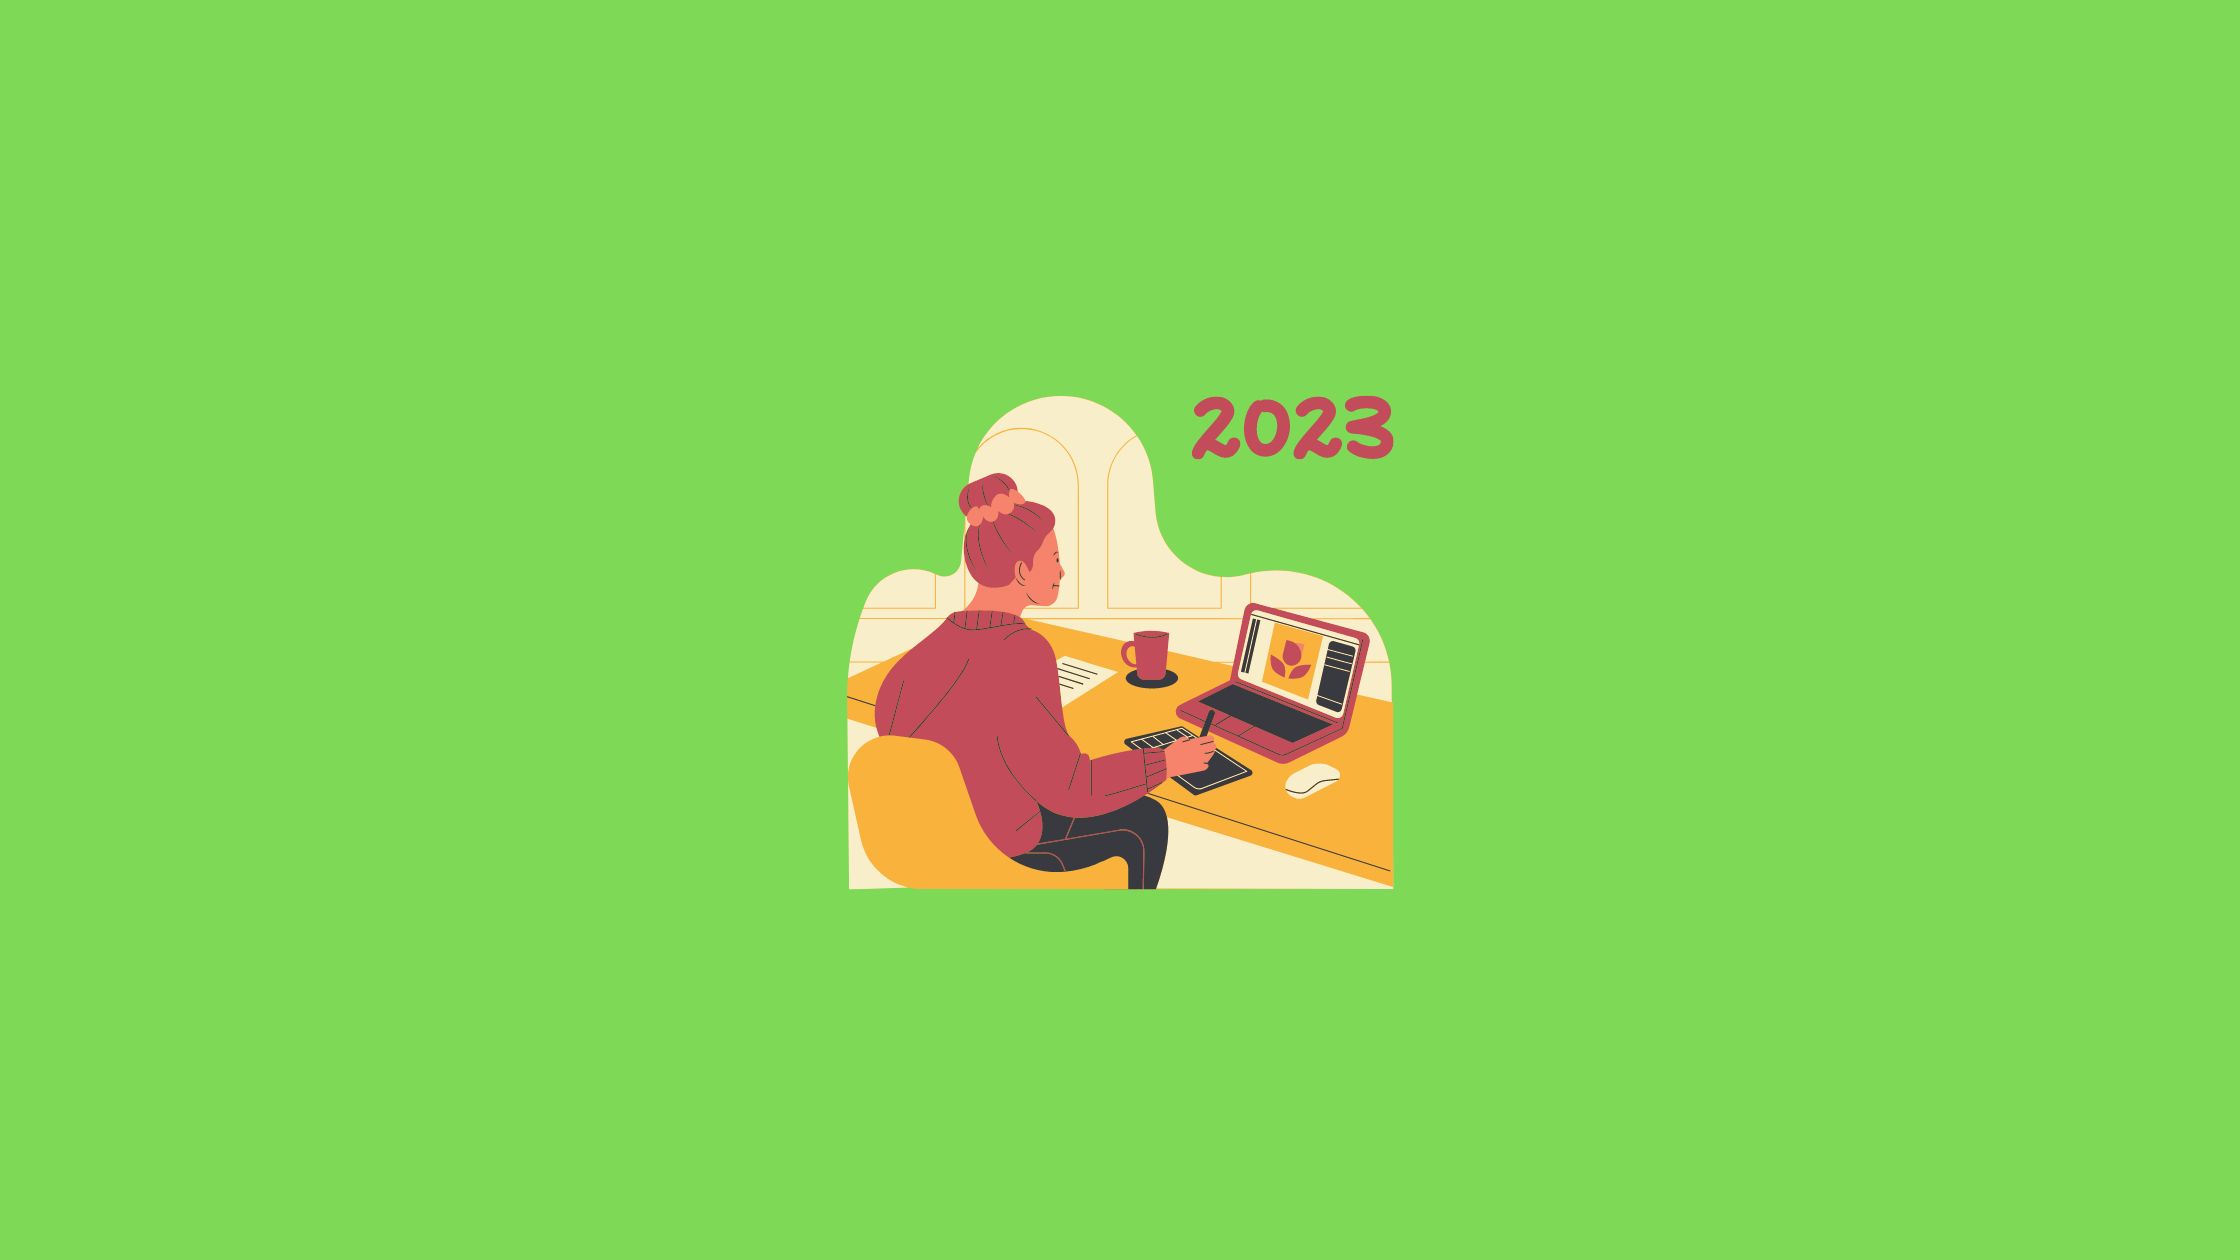 7 Best Unlimited Design Services in 2023